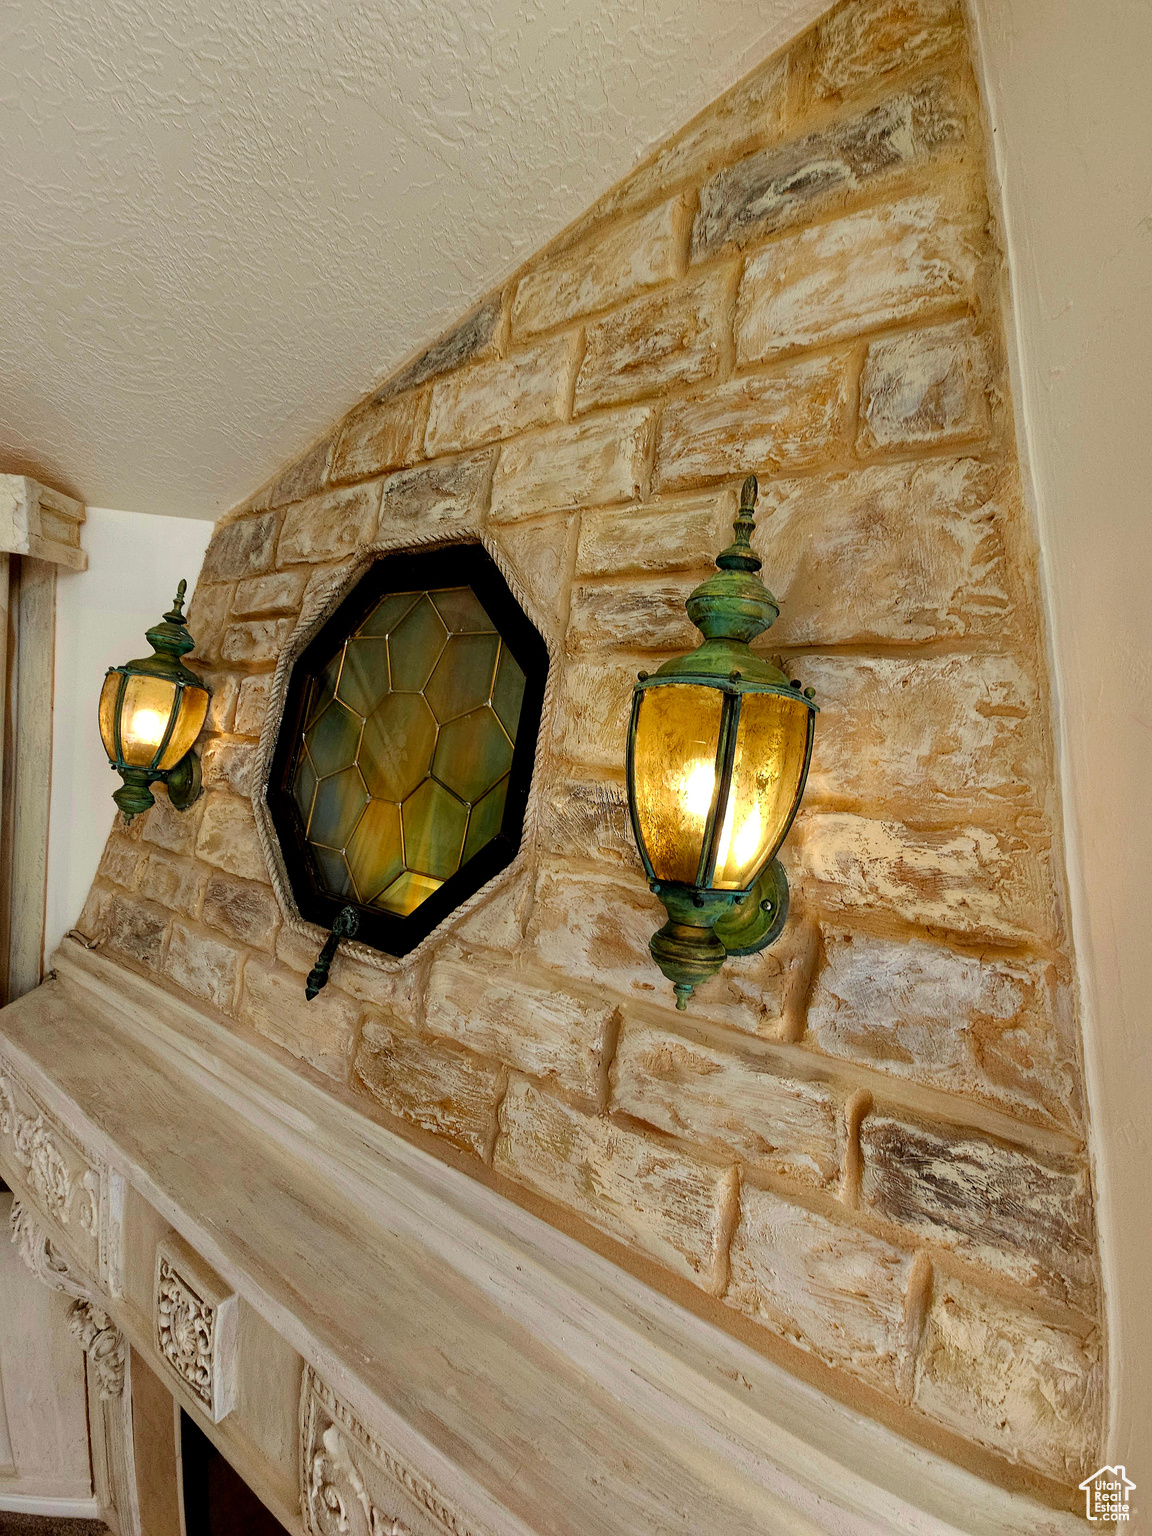 Custom hand-painted stained glass and lanterns add elegant warmth and ambiance to the great room.